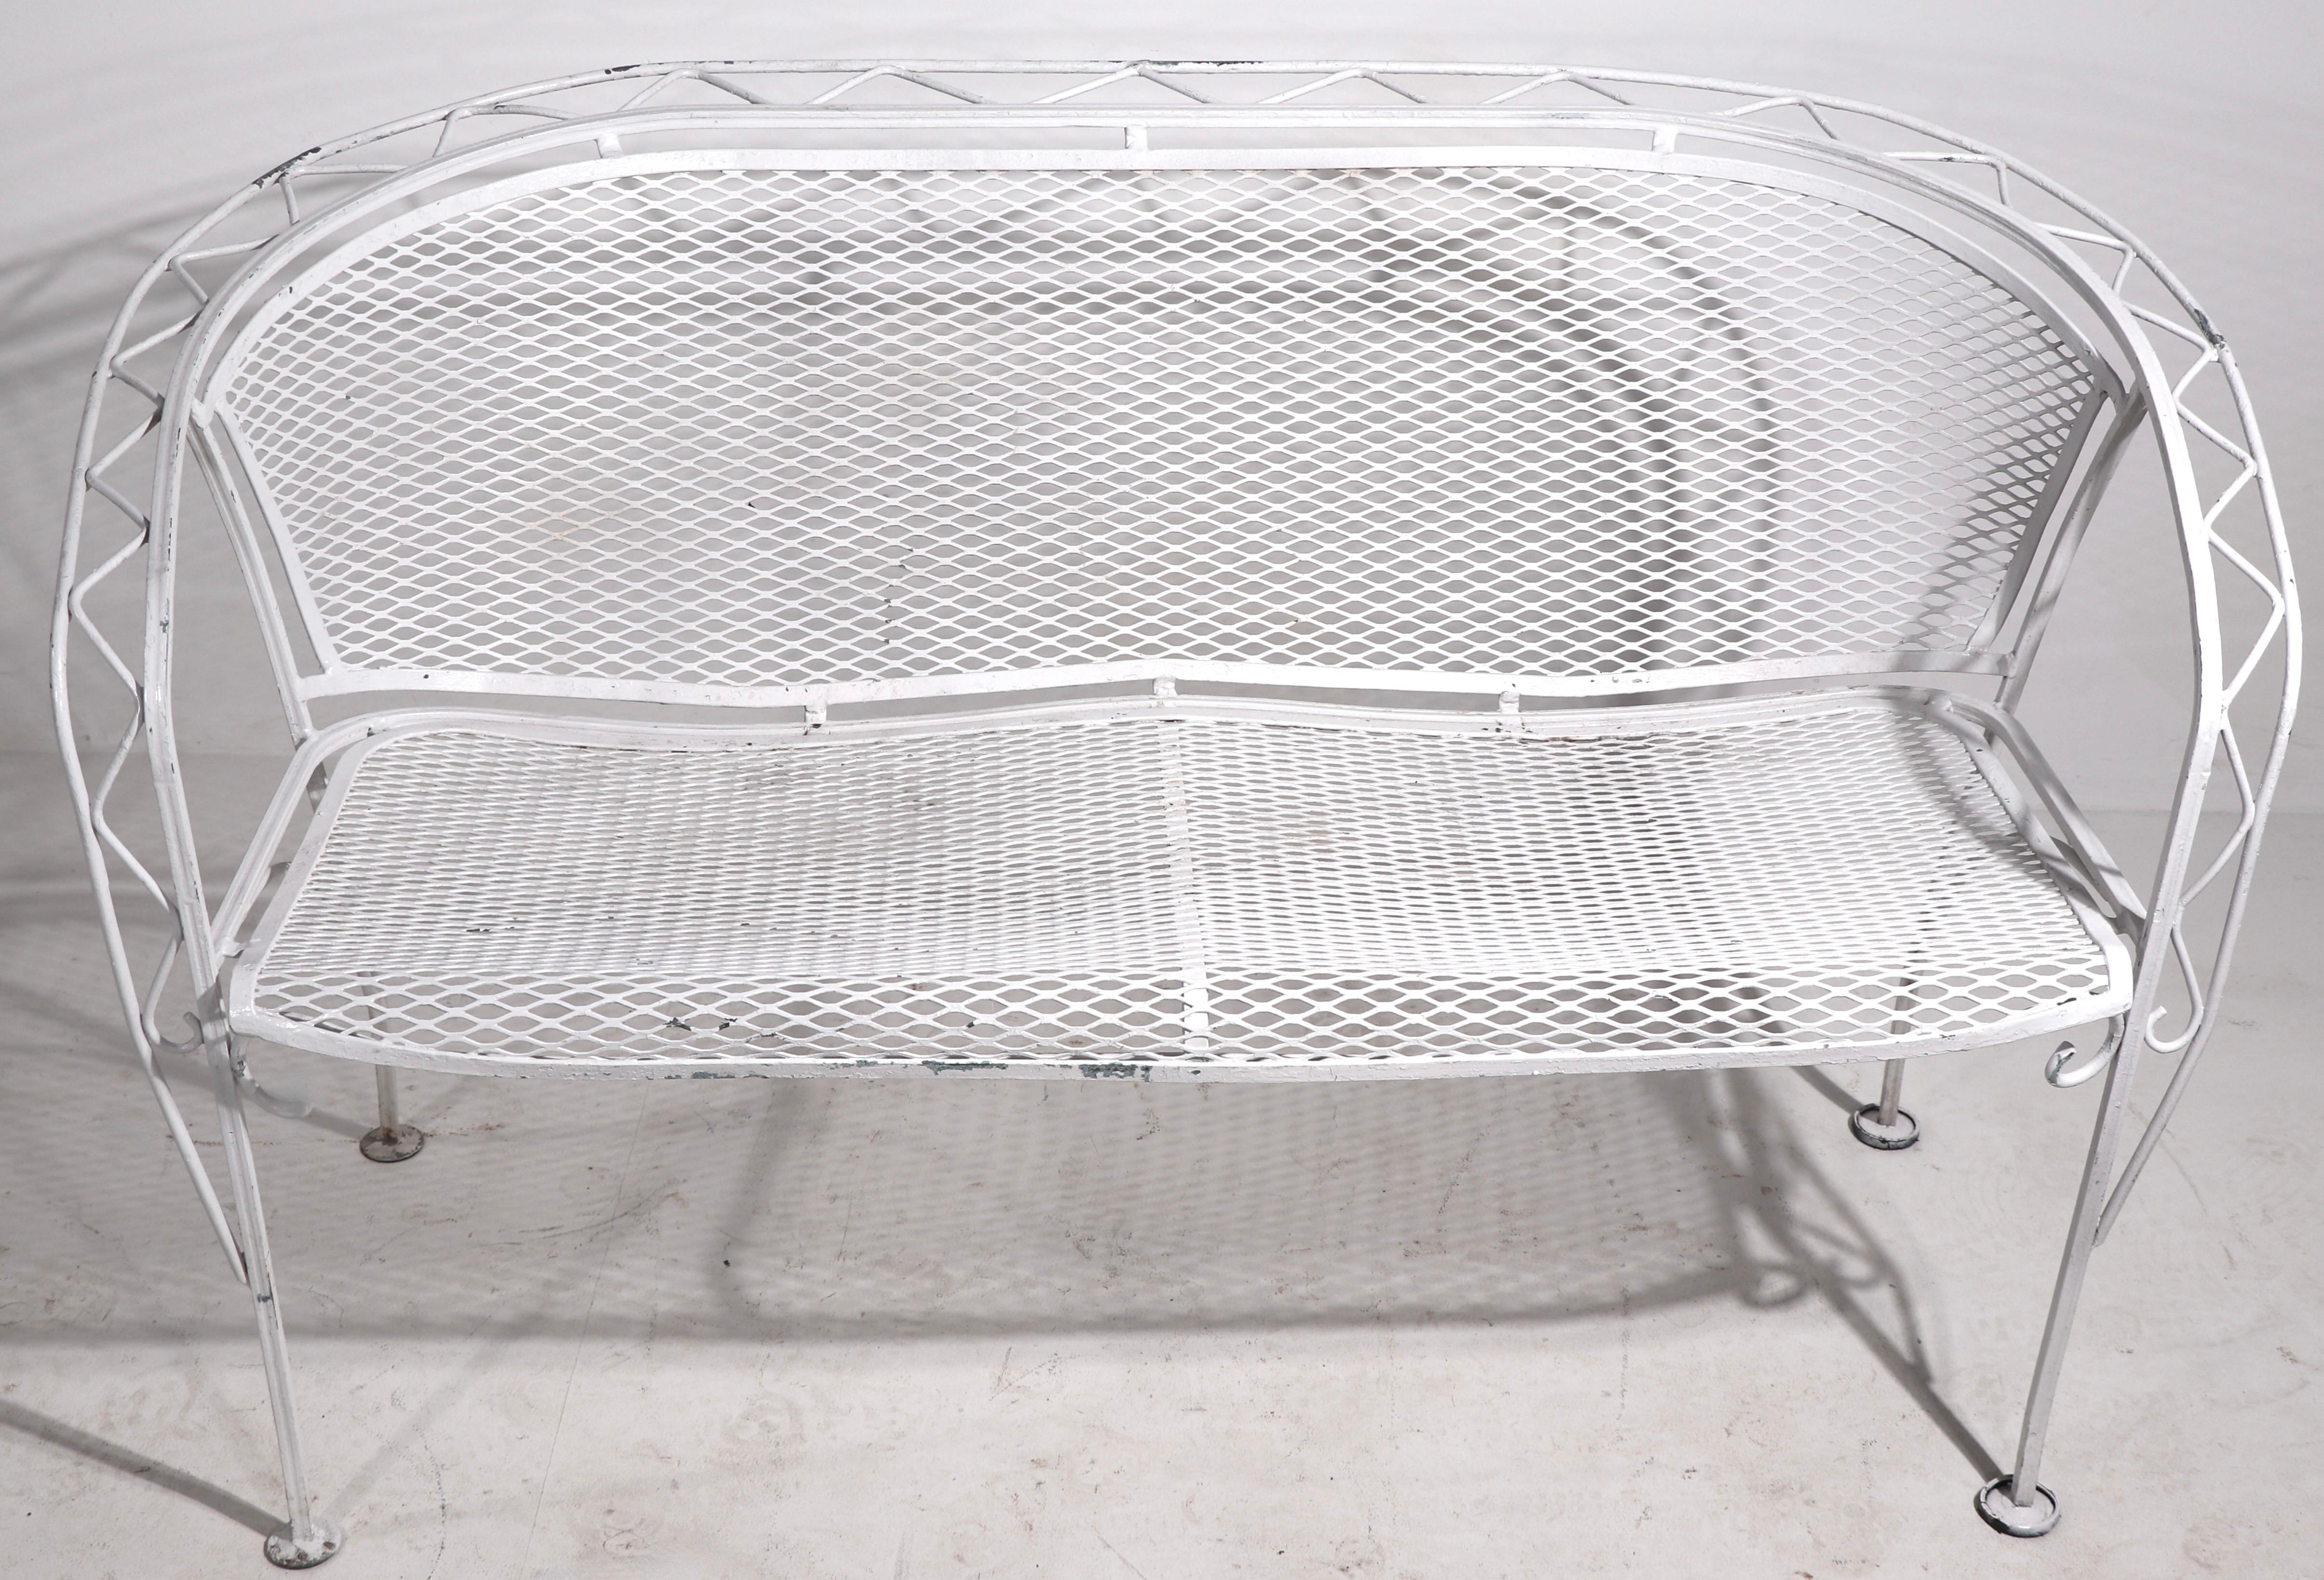 Stylish mid century wrought iron and metal mesh settee by Salterini. This example is in very good condition, free of breaks, bends, or repairs. Currently in later white paint finish which shows some wear and loss, usable as is or we offer custom